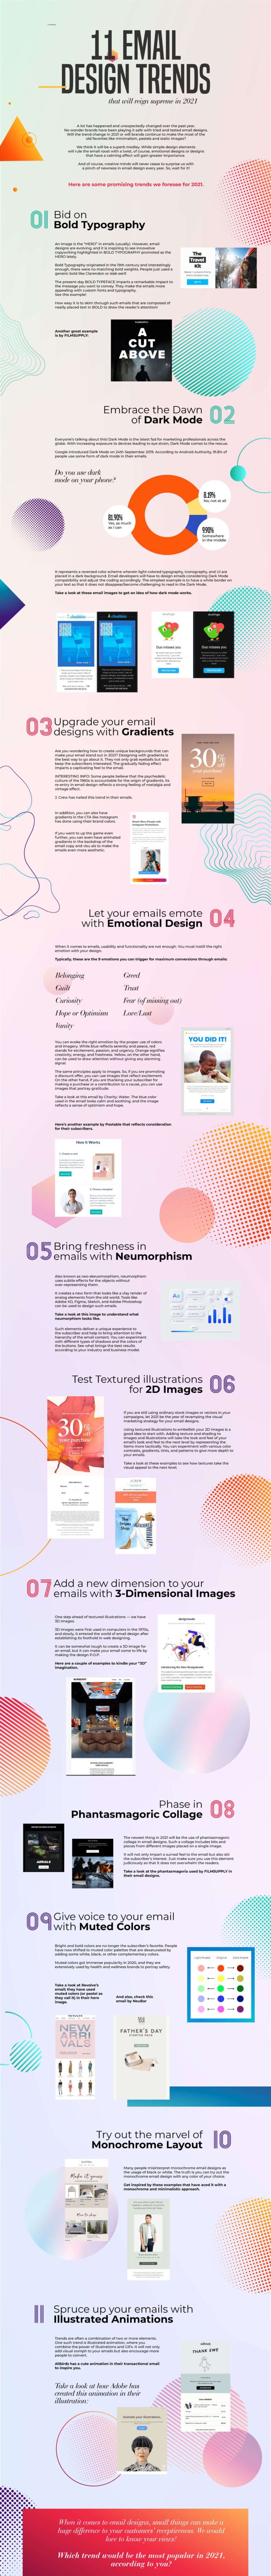 email-design-trends-2021-a-mixed-bag-of-old-and-new-infographic